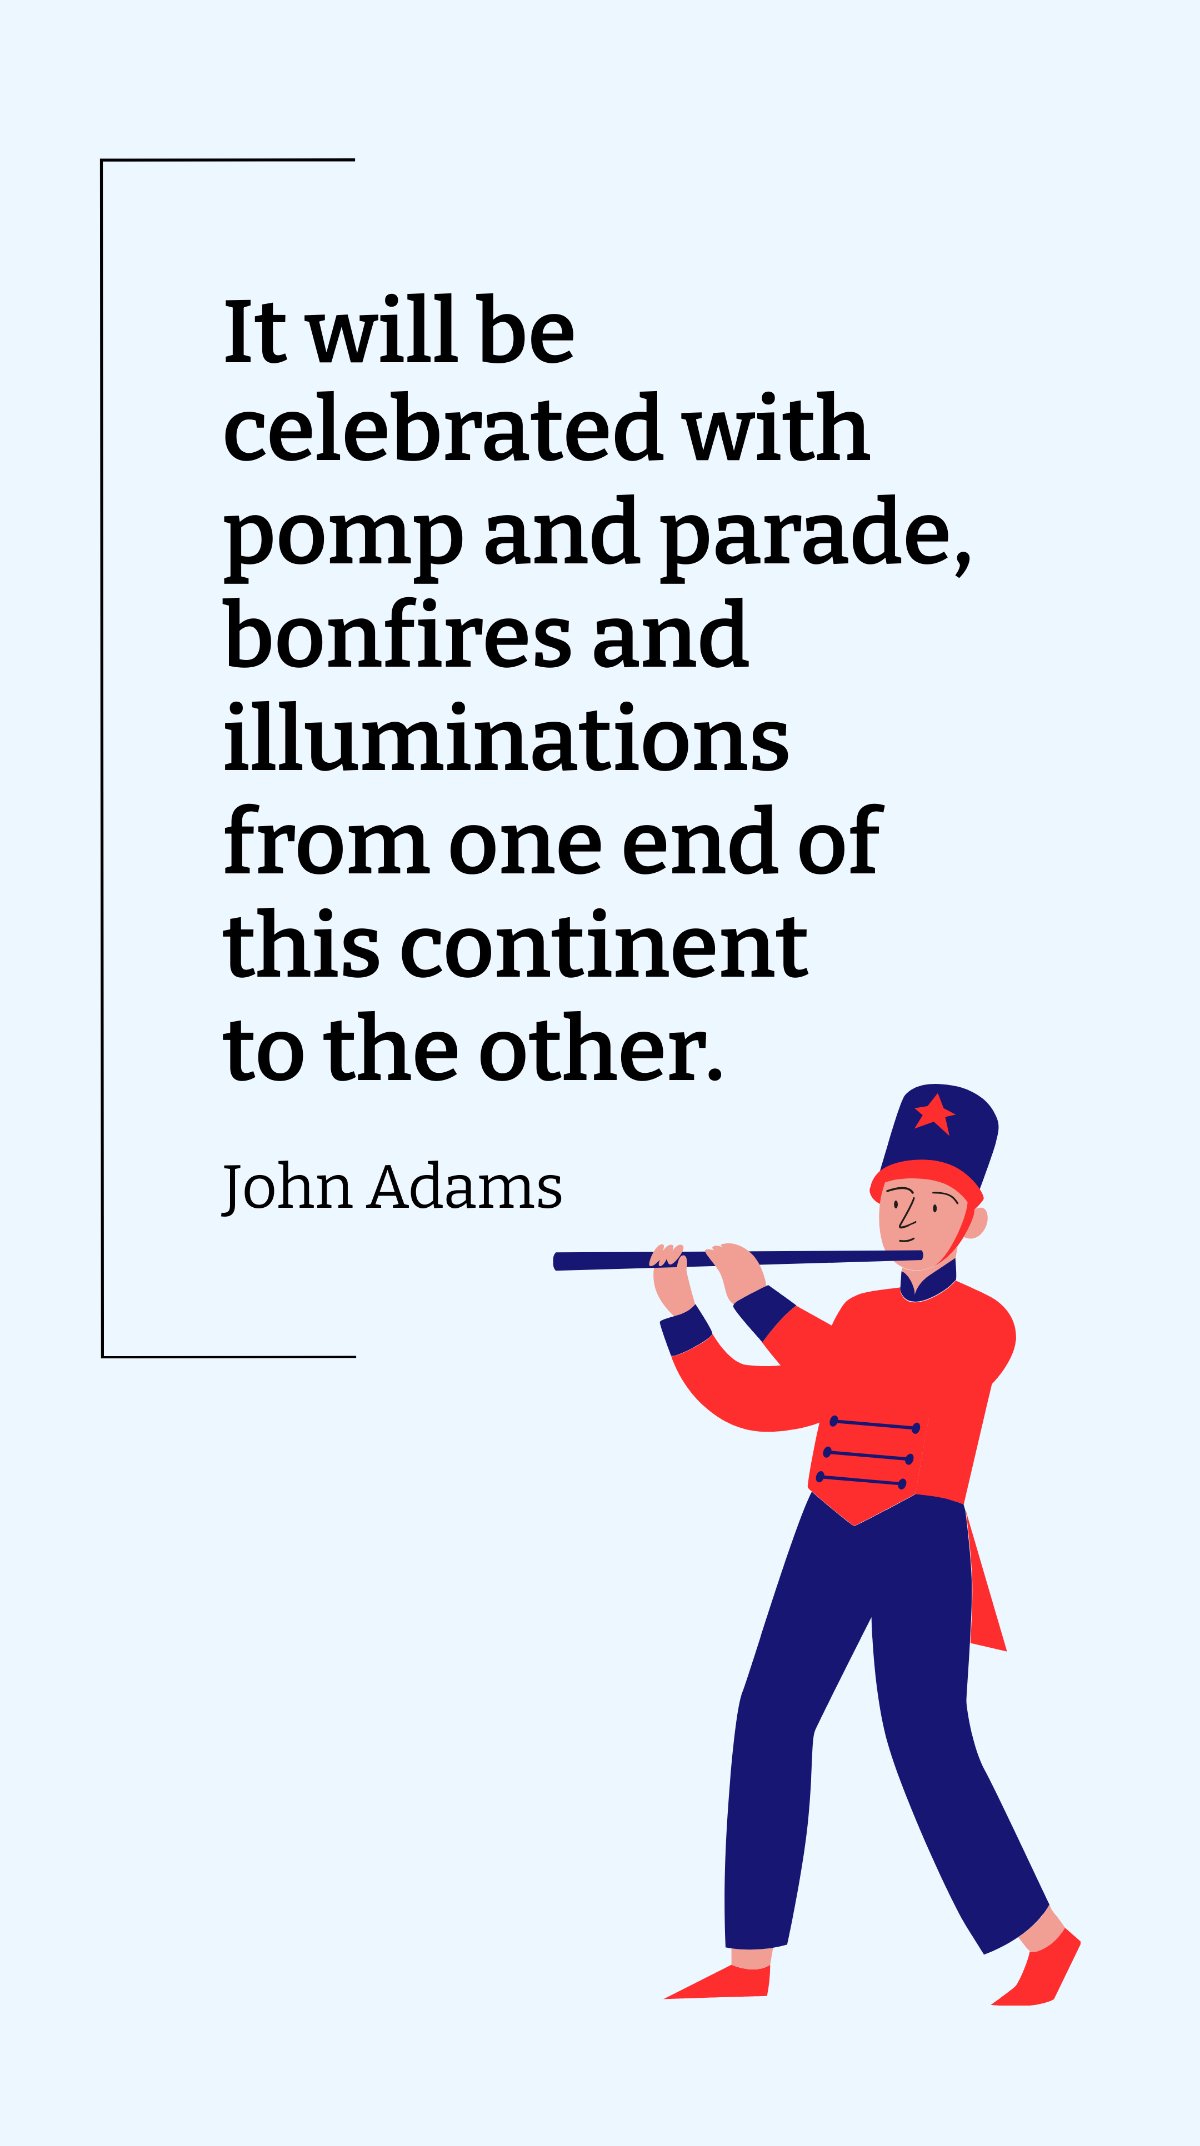 John Adams - It will be celebrated with pomp and parade, bonfires and illuminations from one end of this continent to the other. Template